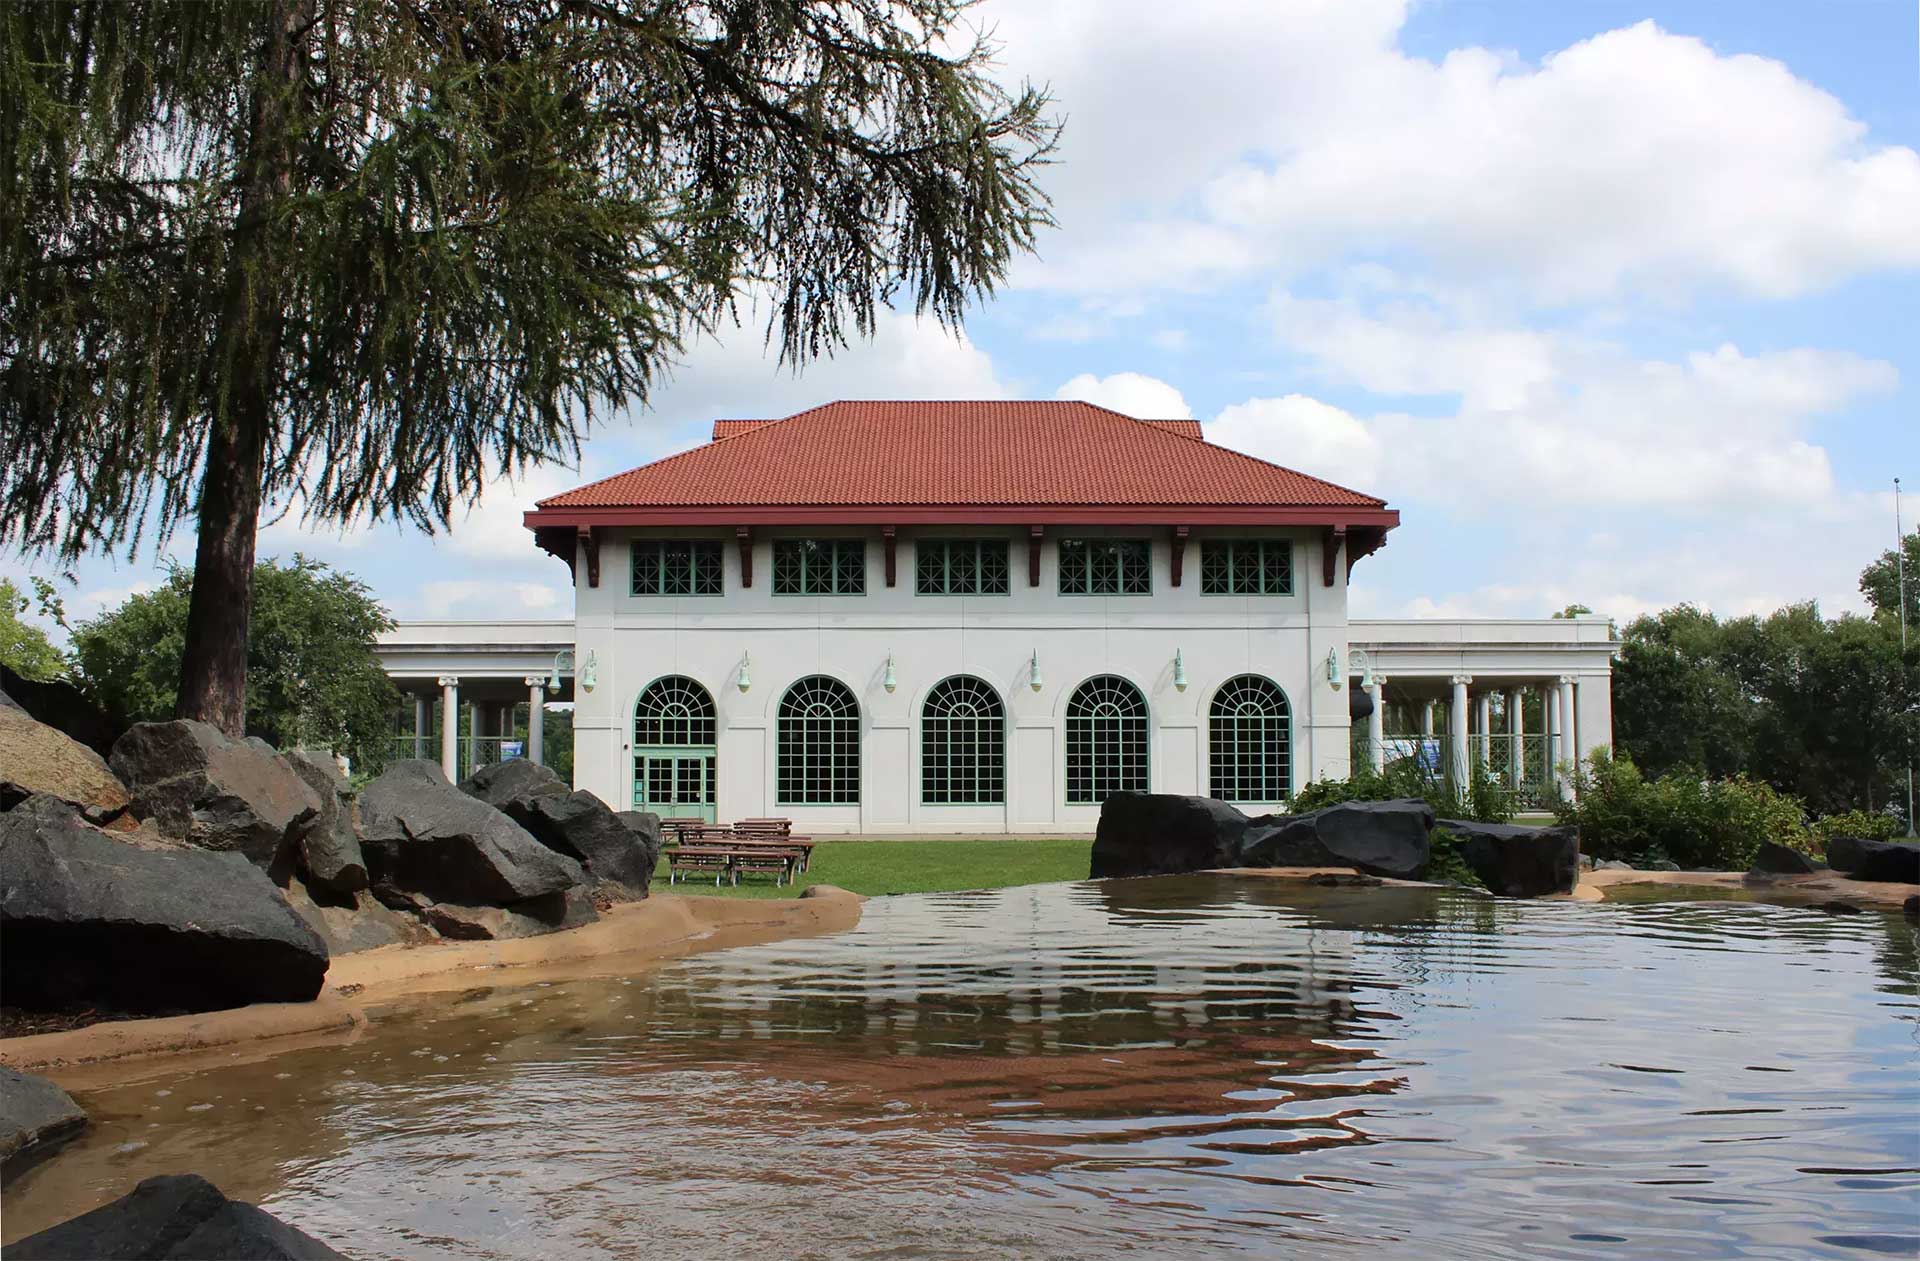 View of Como Lakeside Pavilion from water